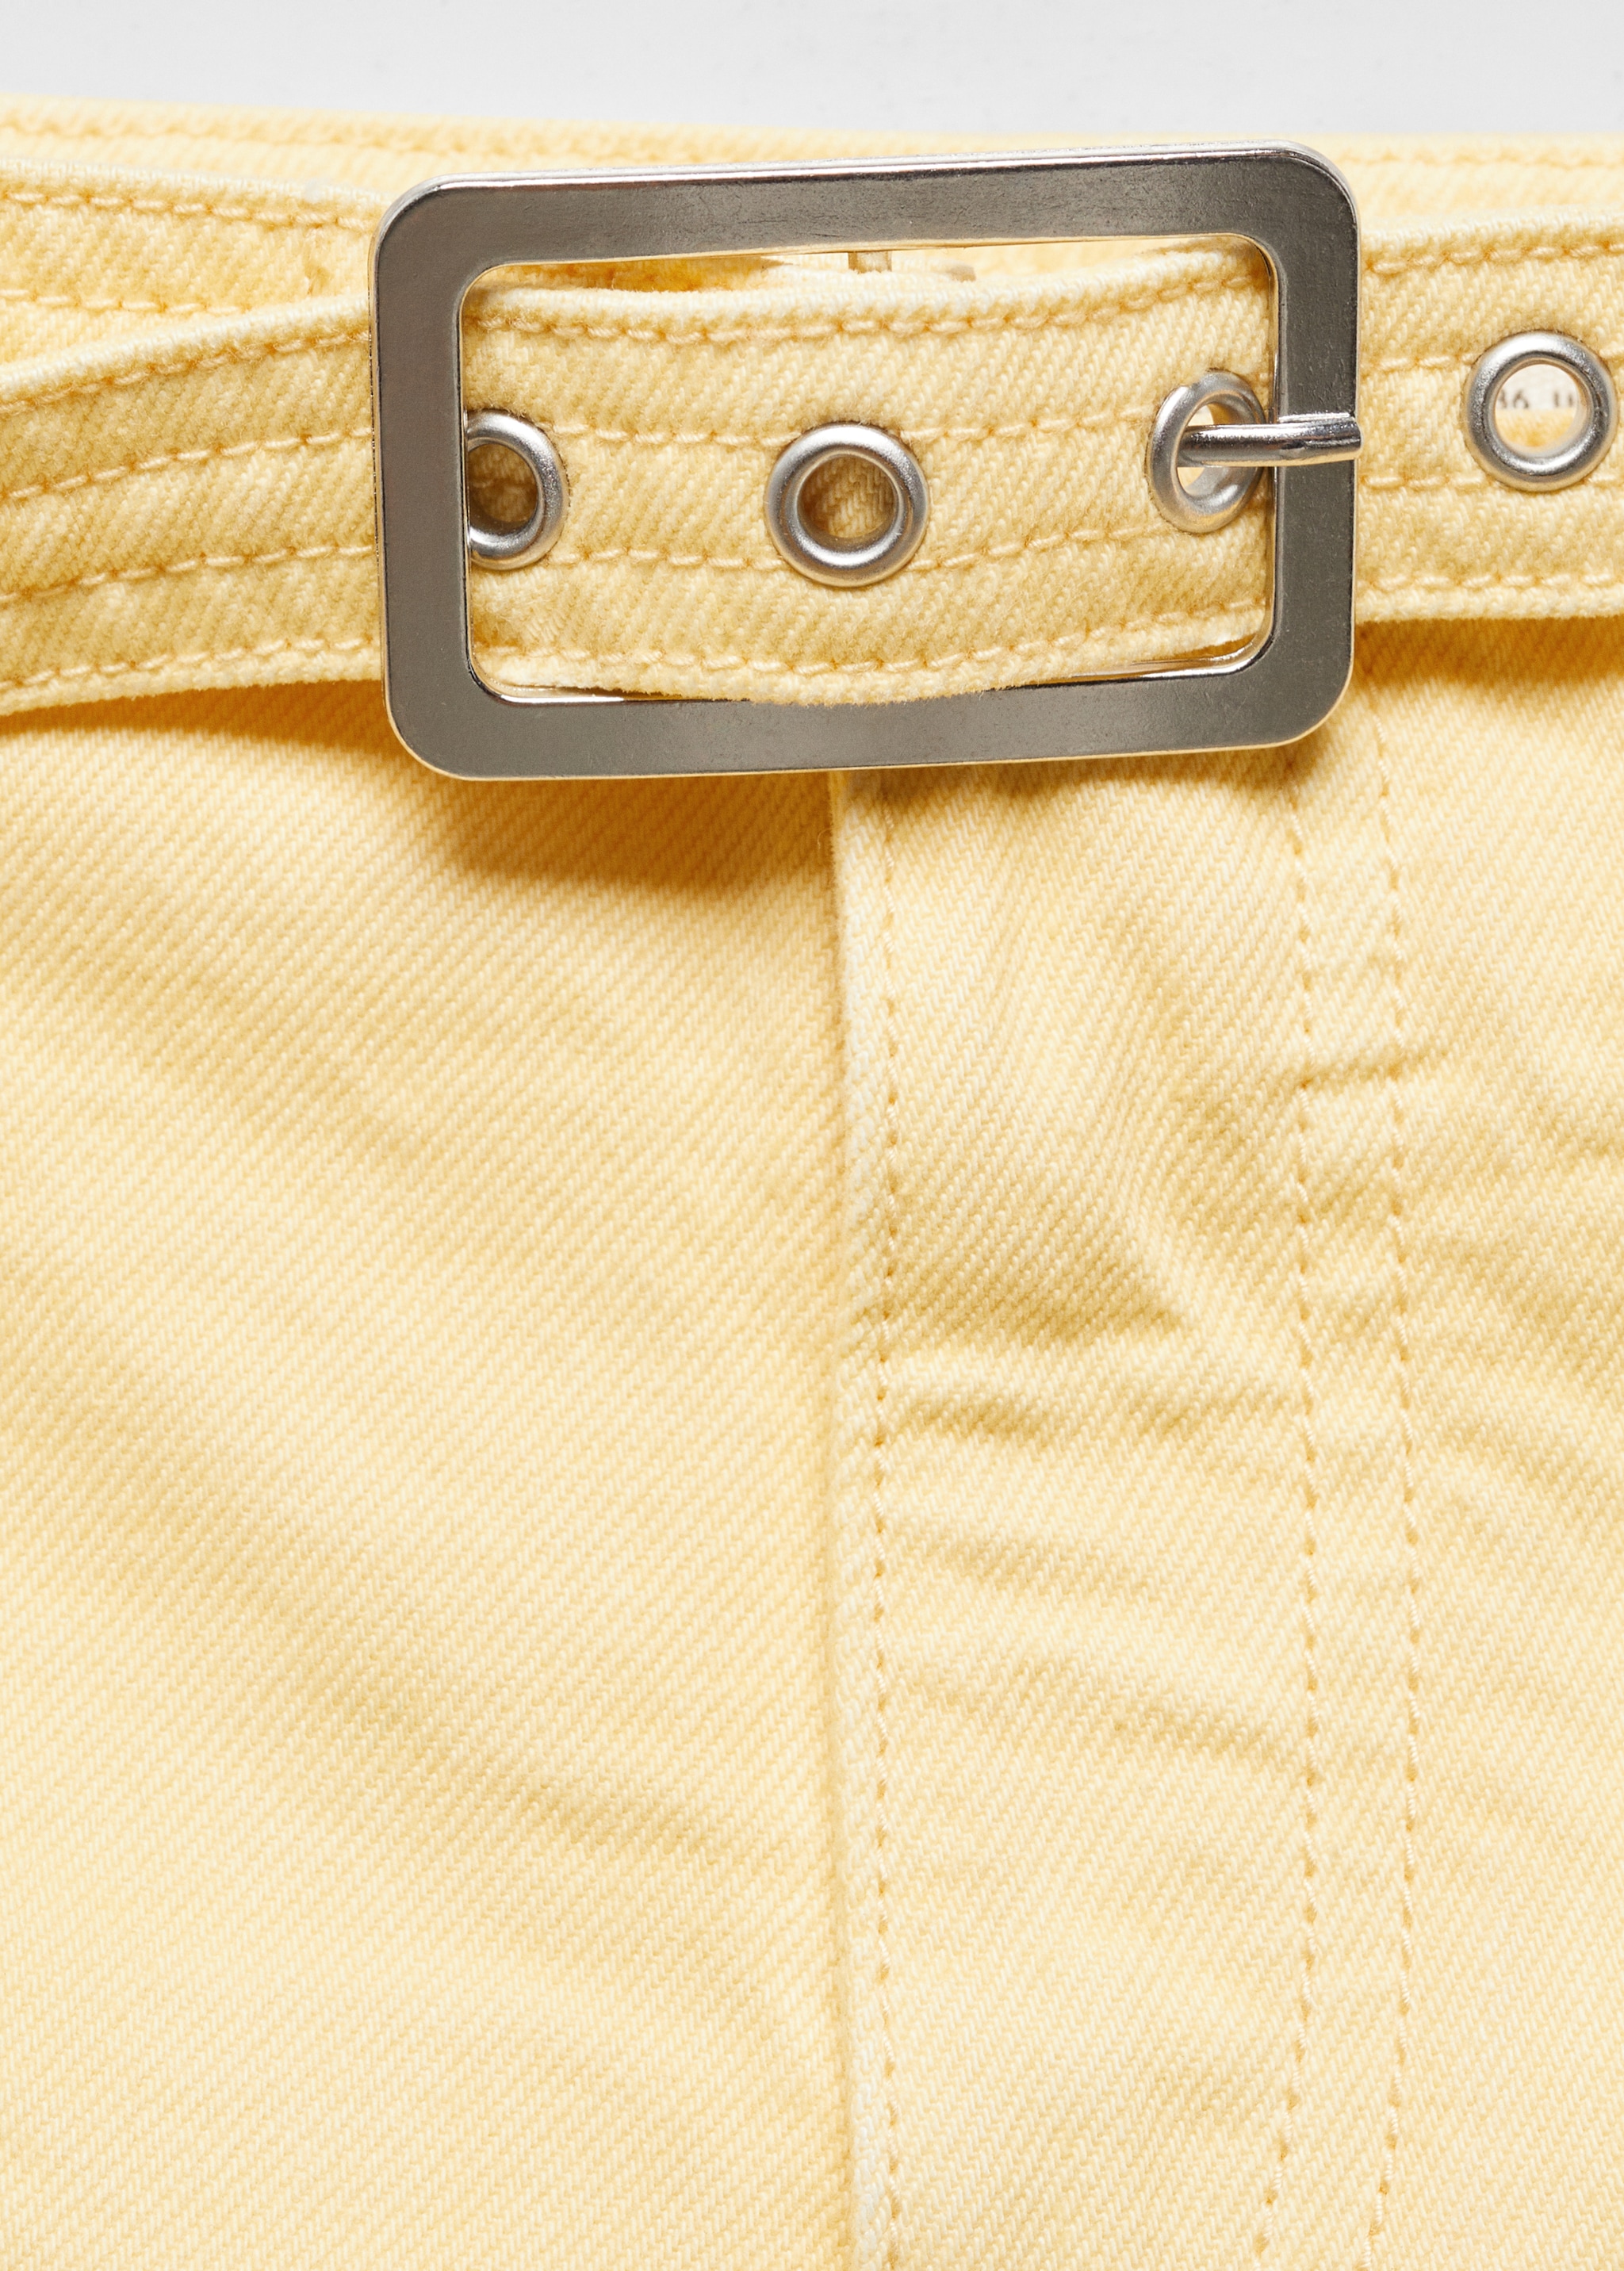 Denim shorts with belt - Details of the article 8